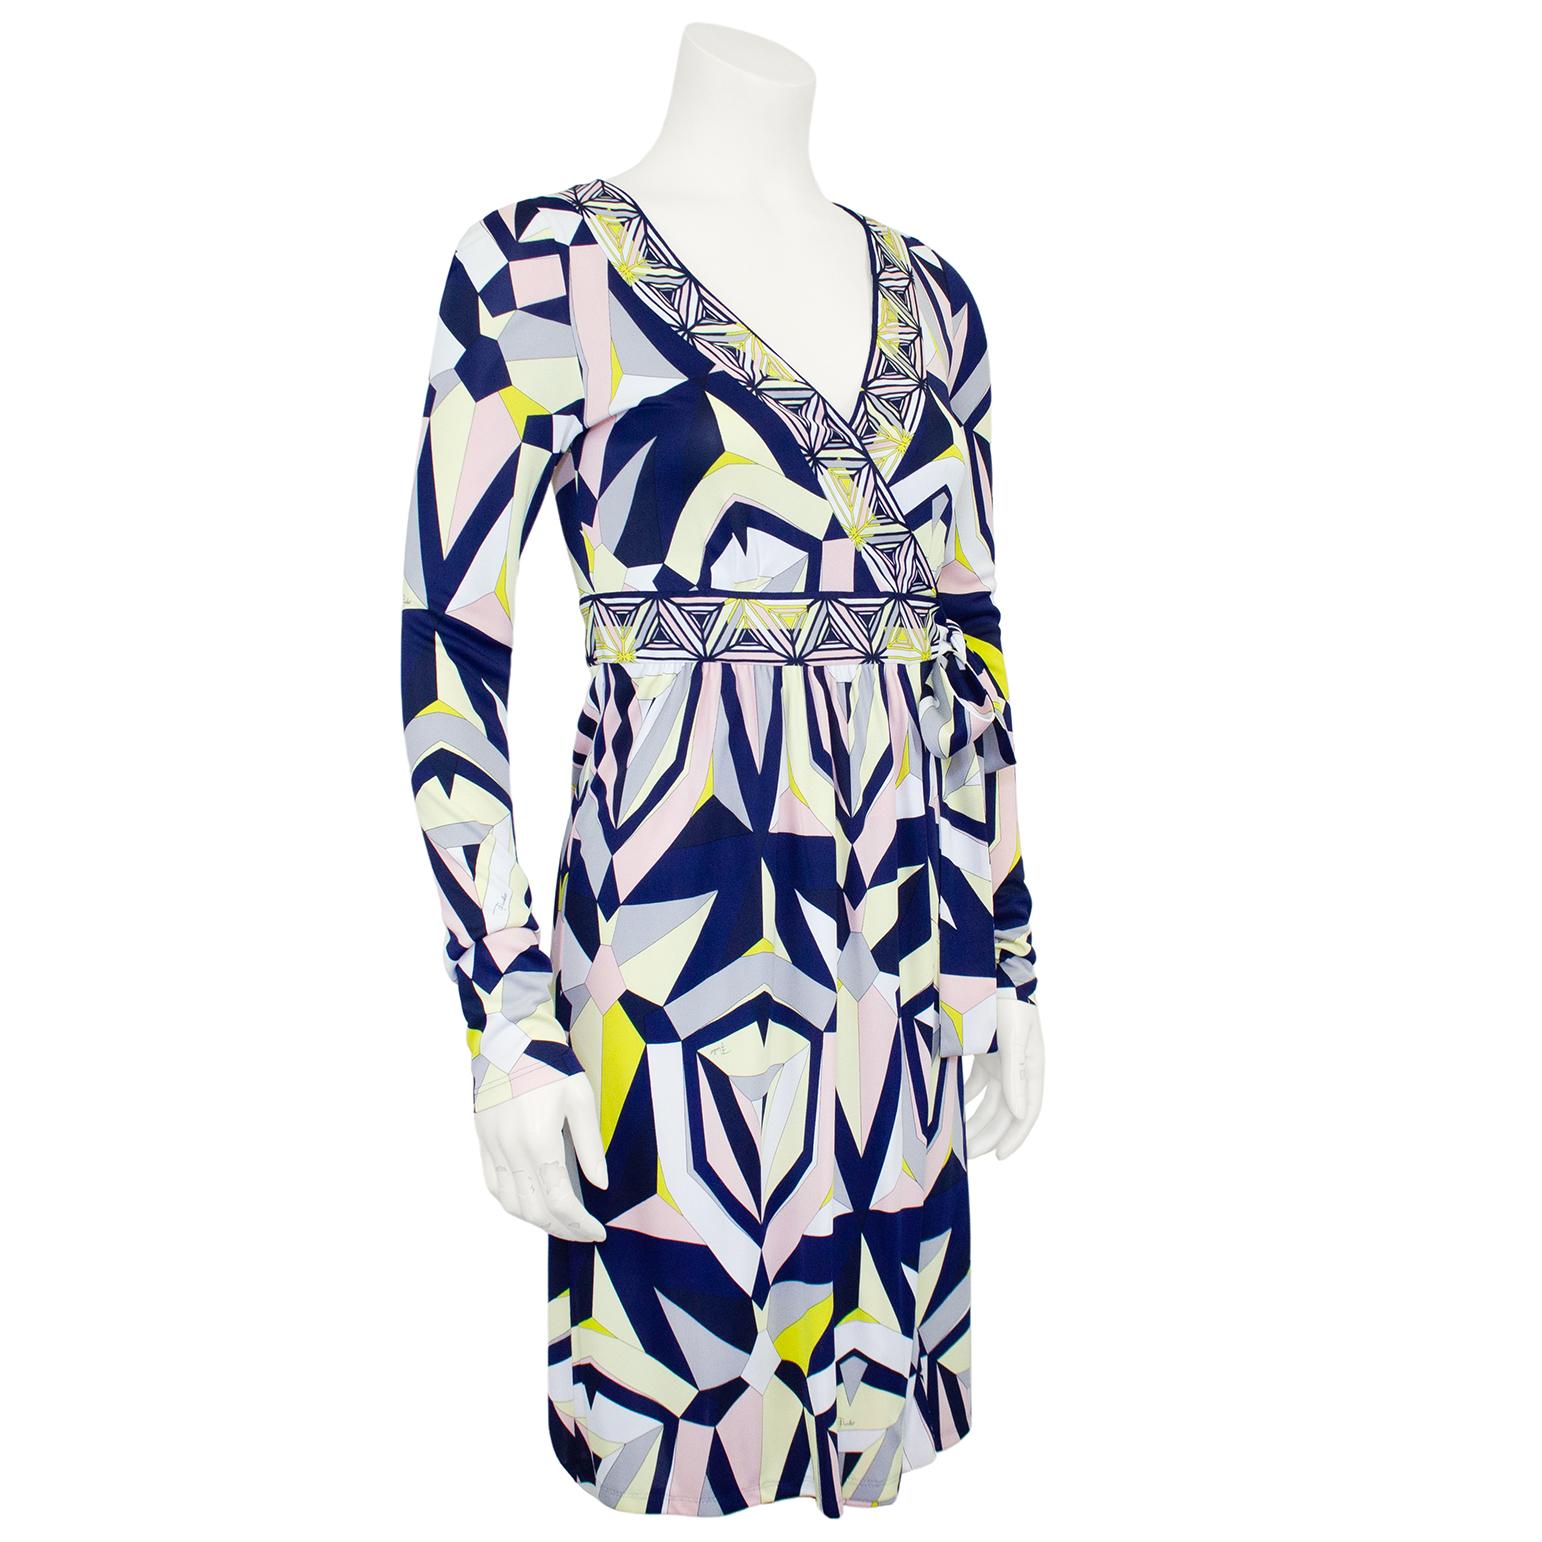 Mid 2000s Emilio Pucci printed wrap style dress. Ties on the left at the waist. V neckline and long sleeves. In excellent condition. Fits a US 4/6.